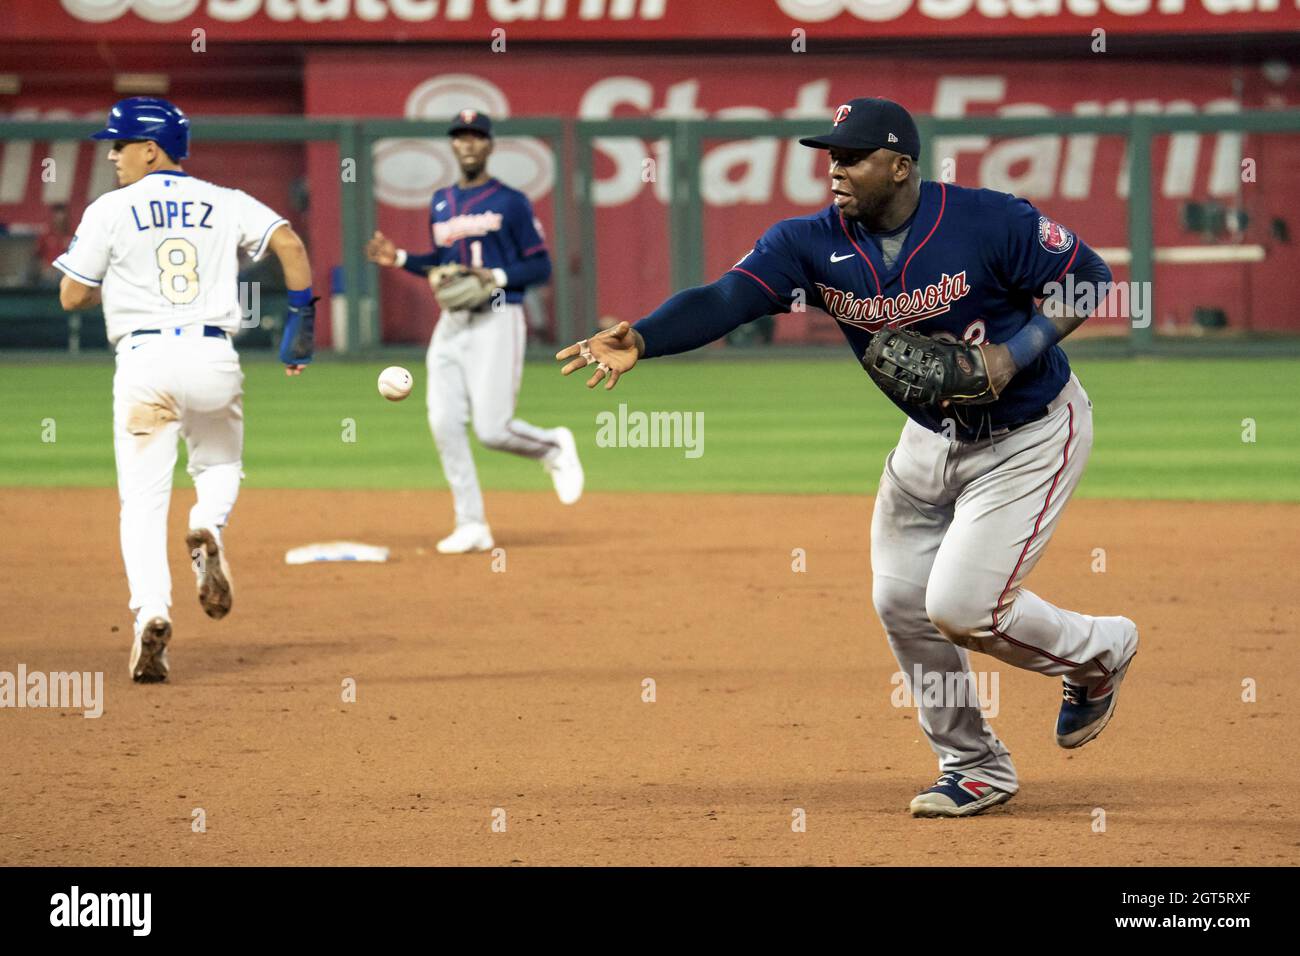 Miguel sano hi-res stock photography and images - Alamy